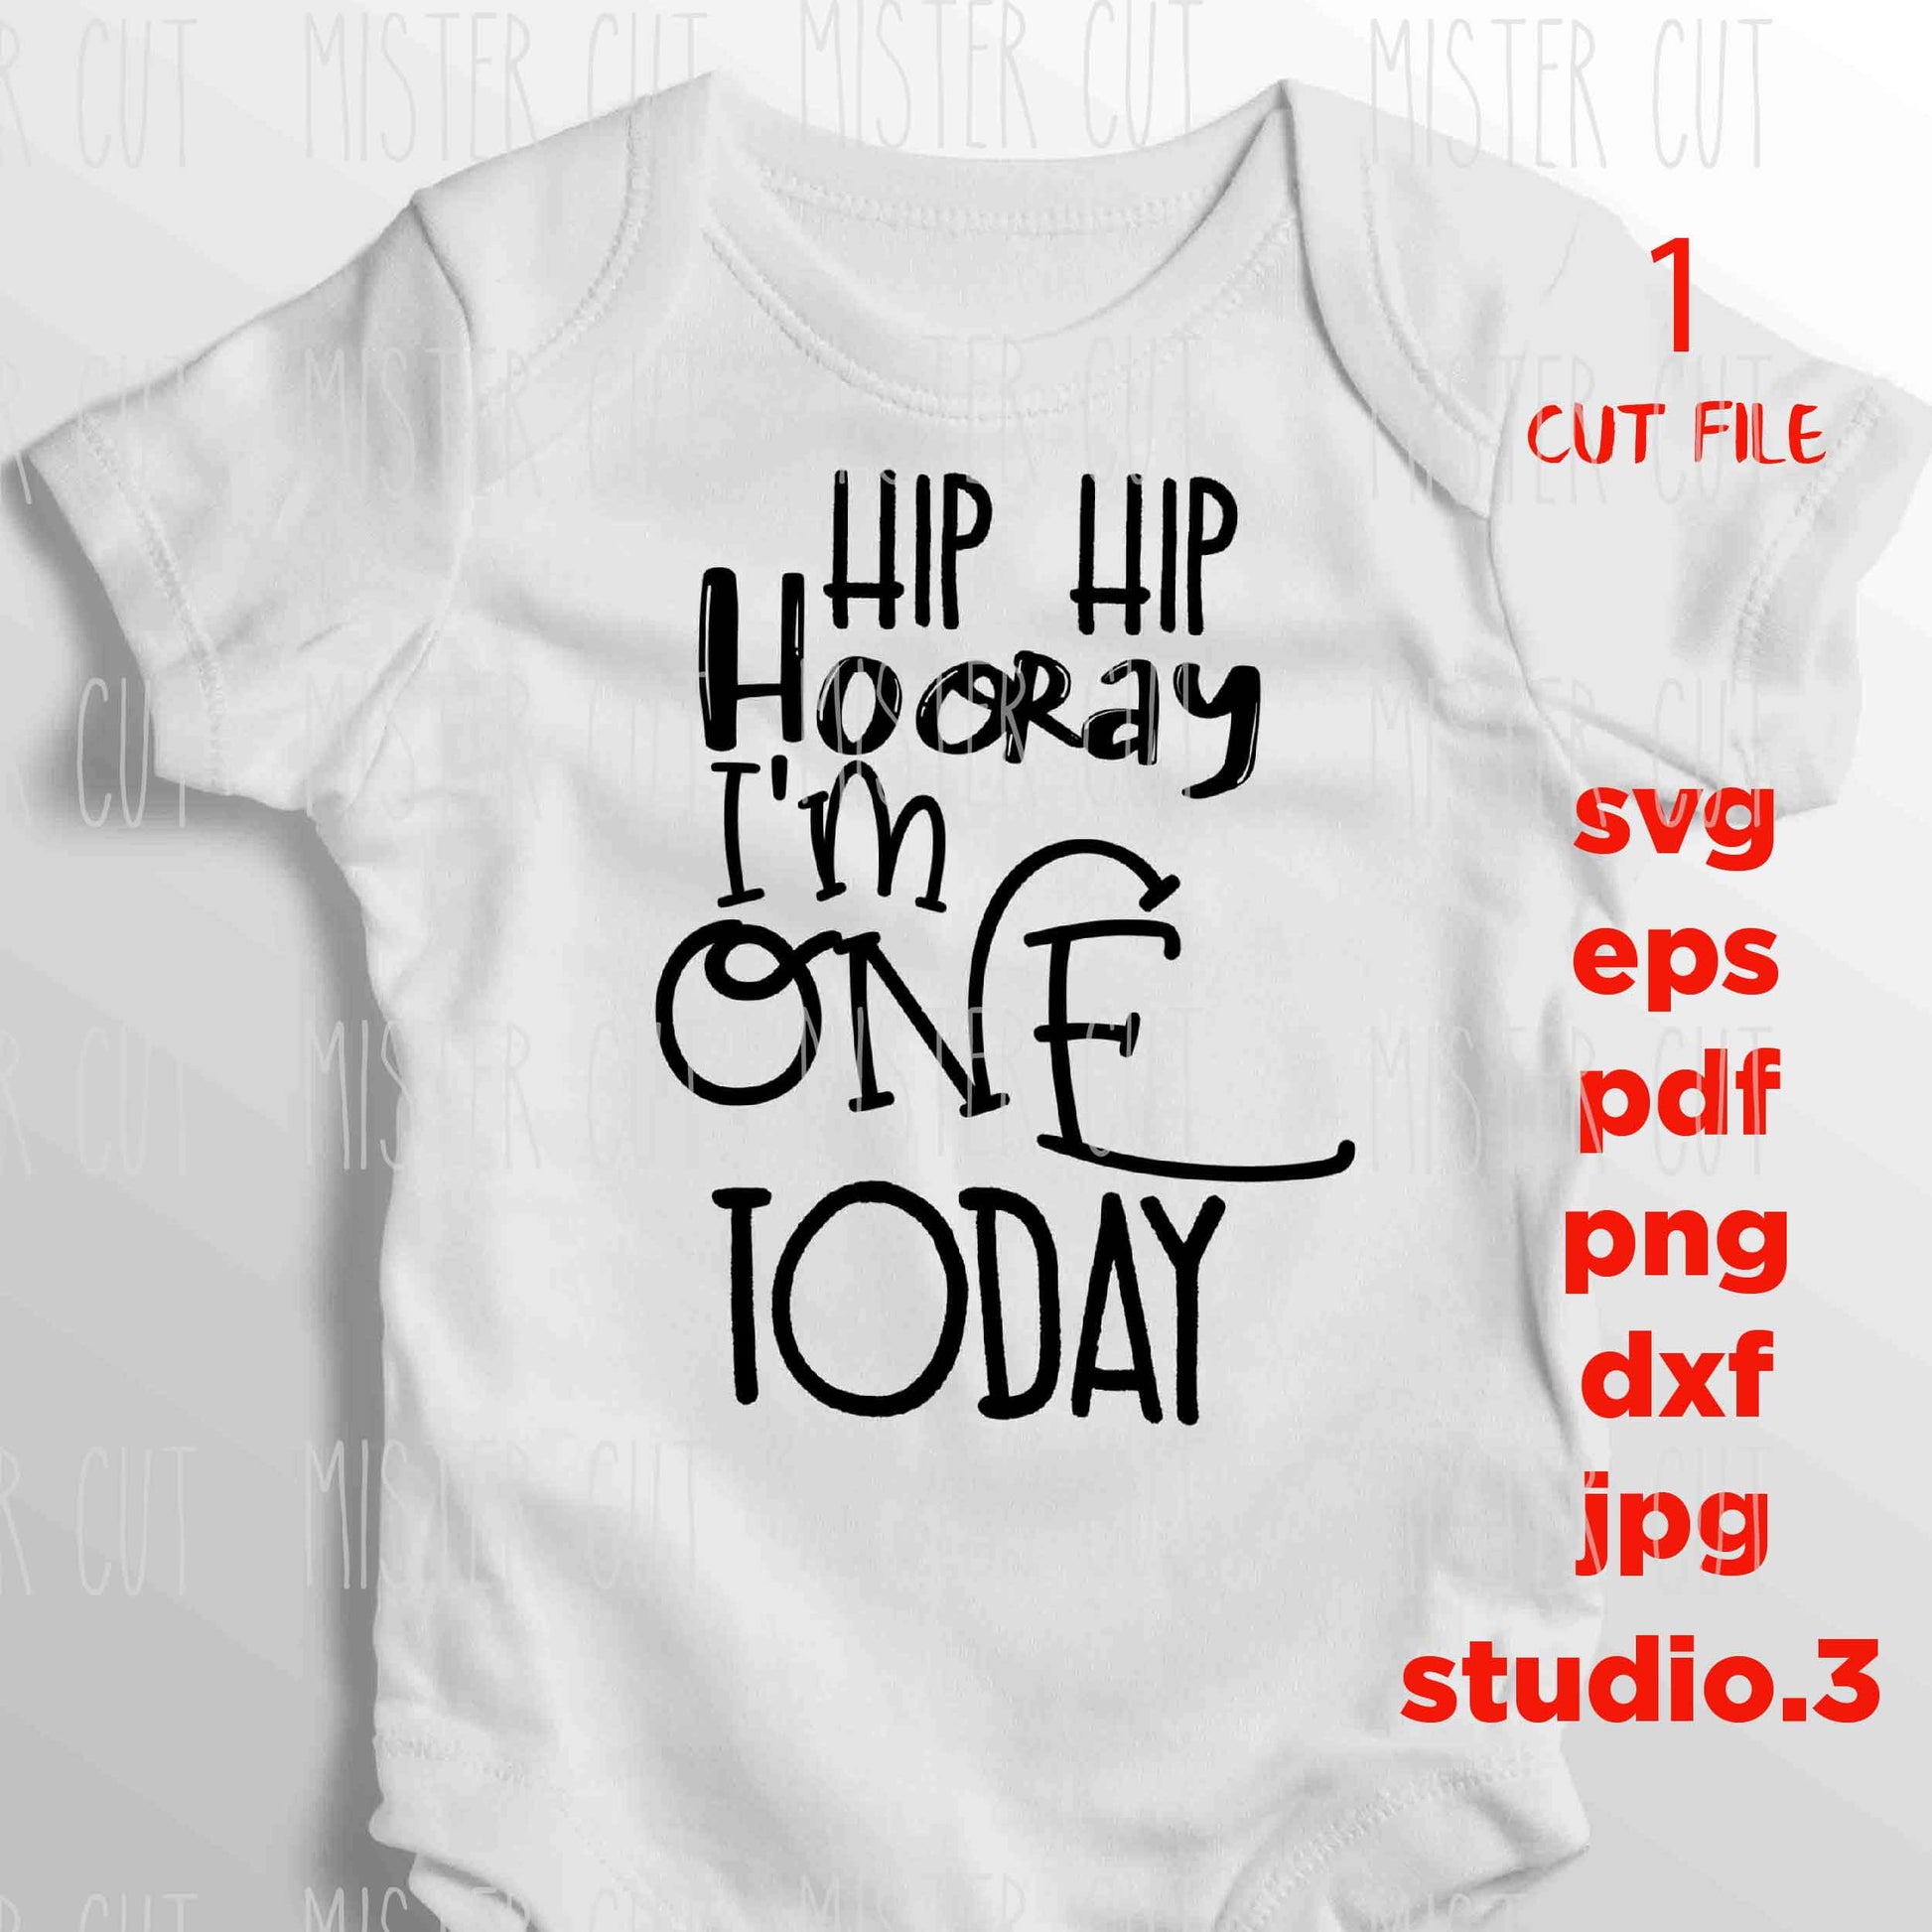 Hip Hip Hooray I'm ONE Today SVG, First Birthday SVG,  DxF, EpS, cut file Cut file, Toddler's First Birthday Outfit Baby Boy 1st Birth Day